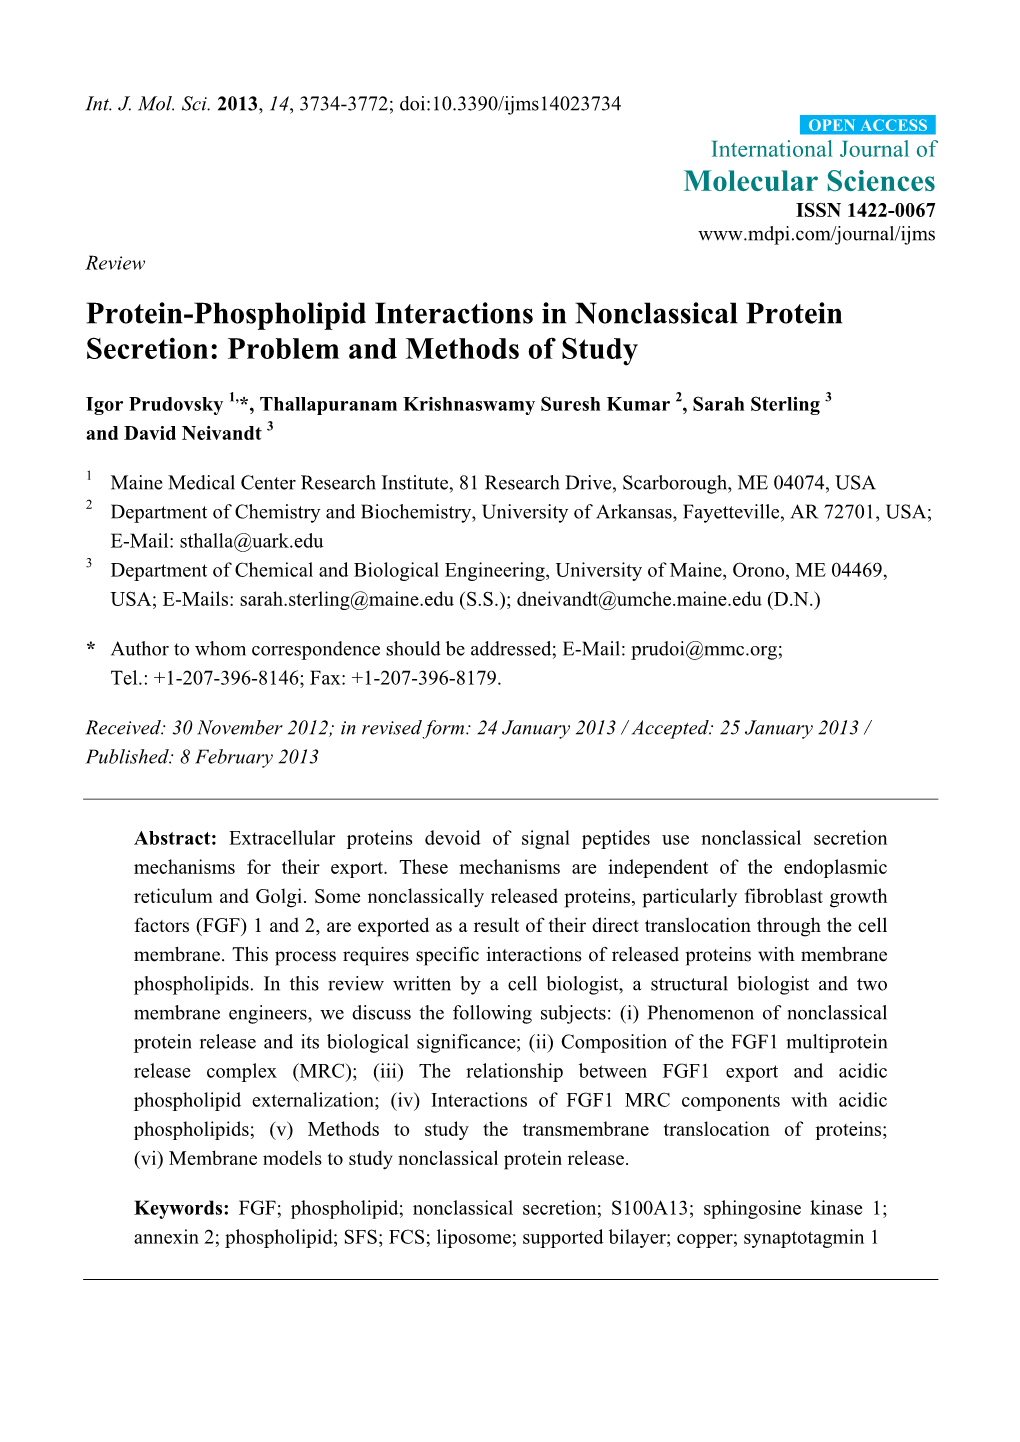 Protein-Phospholipid Interactions in Nonclassical Protein Secretion: Problem and Methods of Study